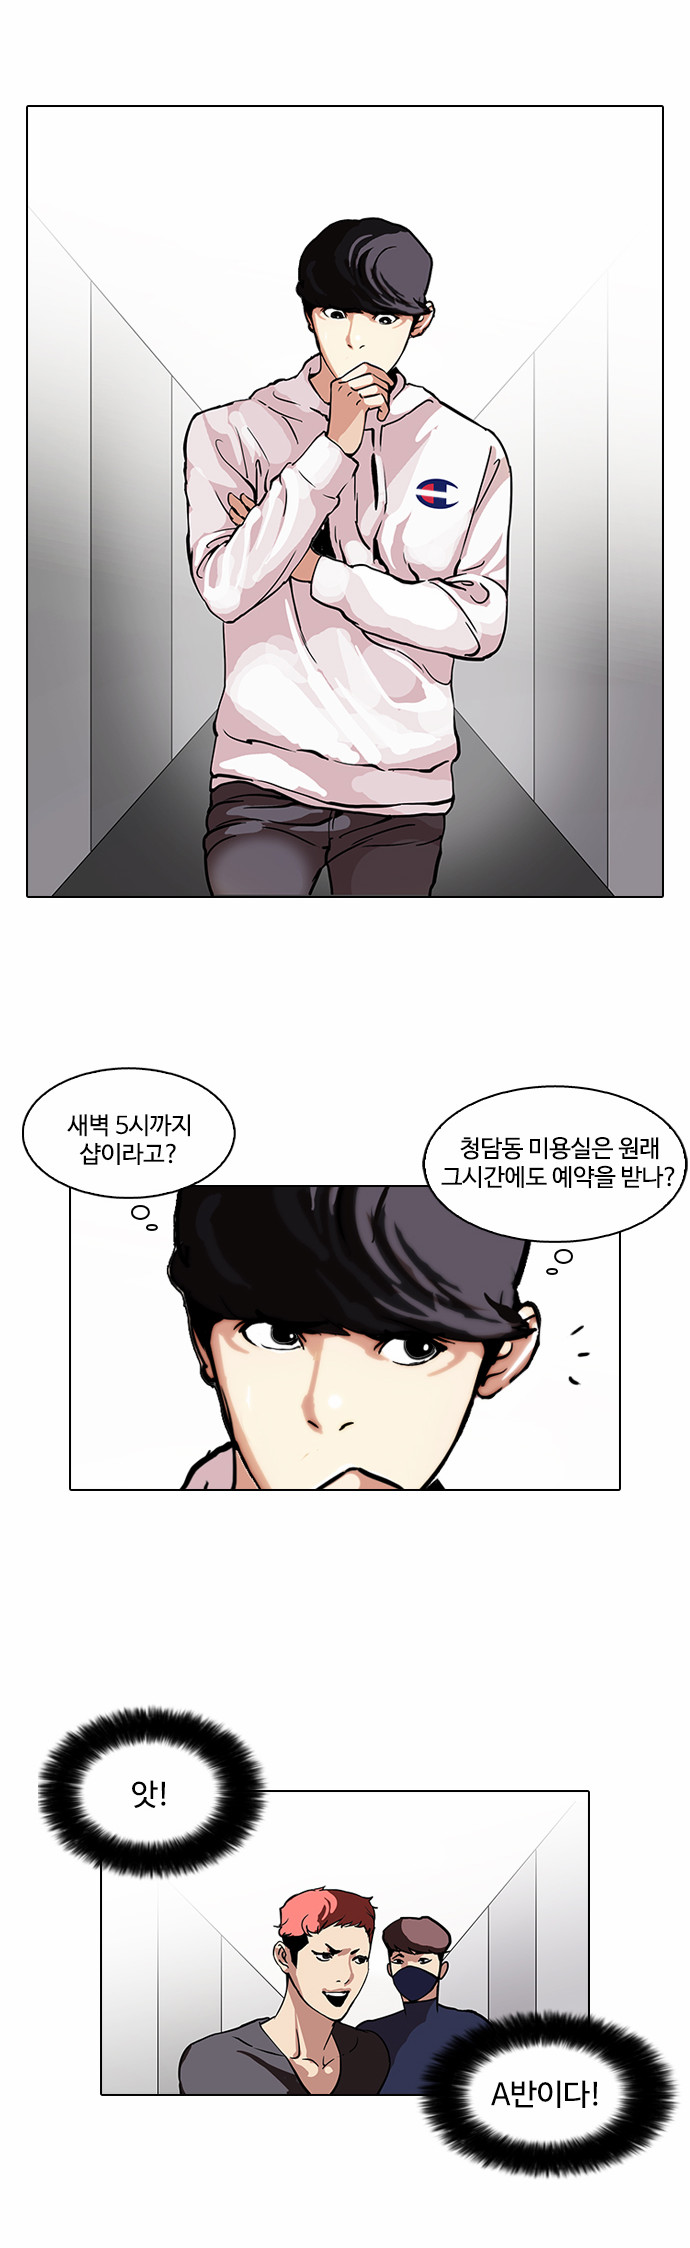 Lookism - Chapter 102 - Page 3